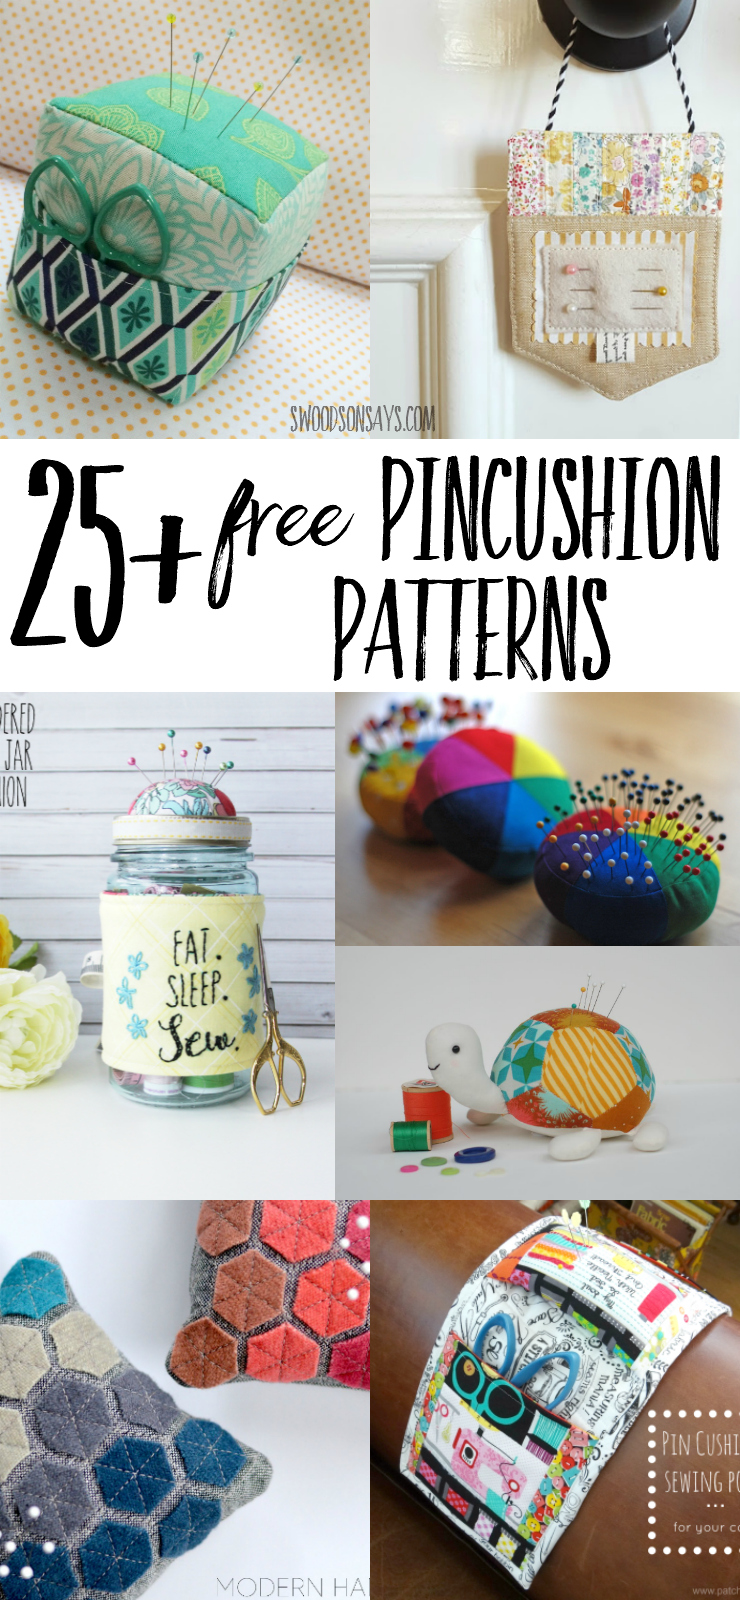 A big round up of free pincushion sewing patterns and tutorials! Perfect fabric scrap projects and handmade gifts to sew - use a free pincushion pattern to sew something up quickly! #pincushion